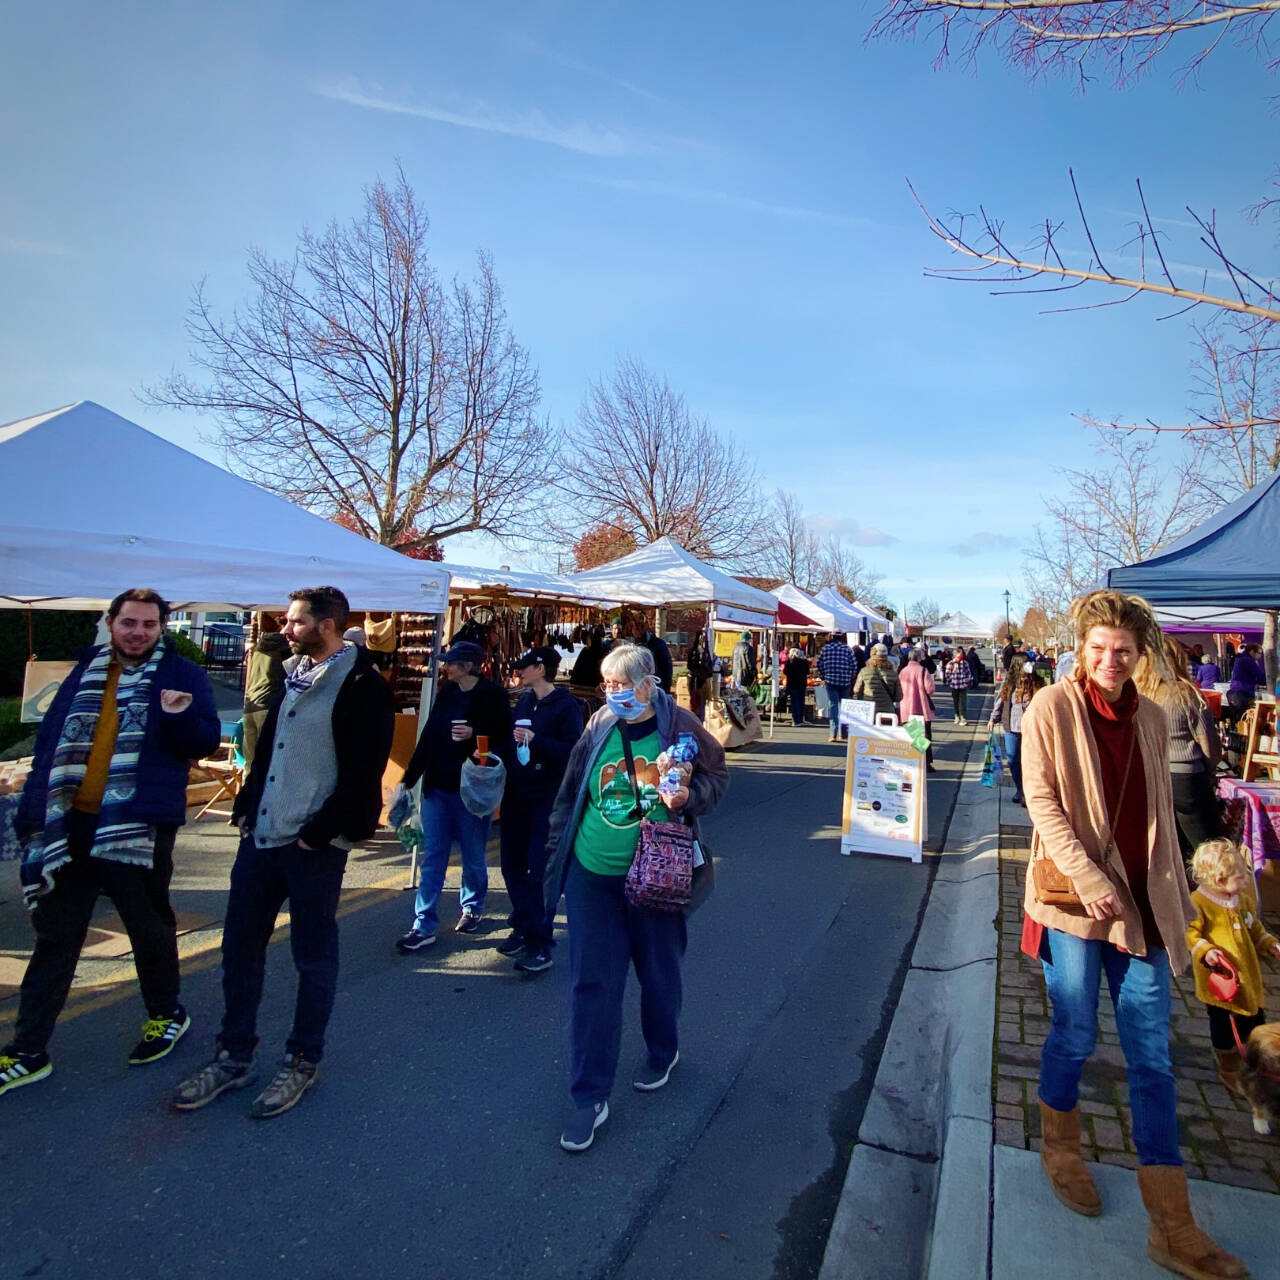 Photo courtesy of Sequim Farmers & Artisans Market / The Sequim Farmers & Artisans Market’s November Market is set for 10 a.m.-2 p.m. on Saturday, Nov. 19, at the Sequim Civic Center plaza, 152 W. Cedar St.